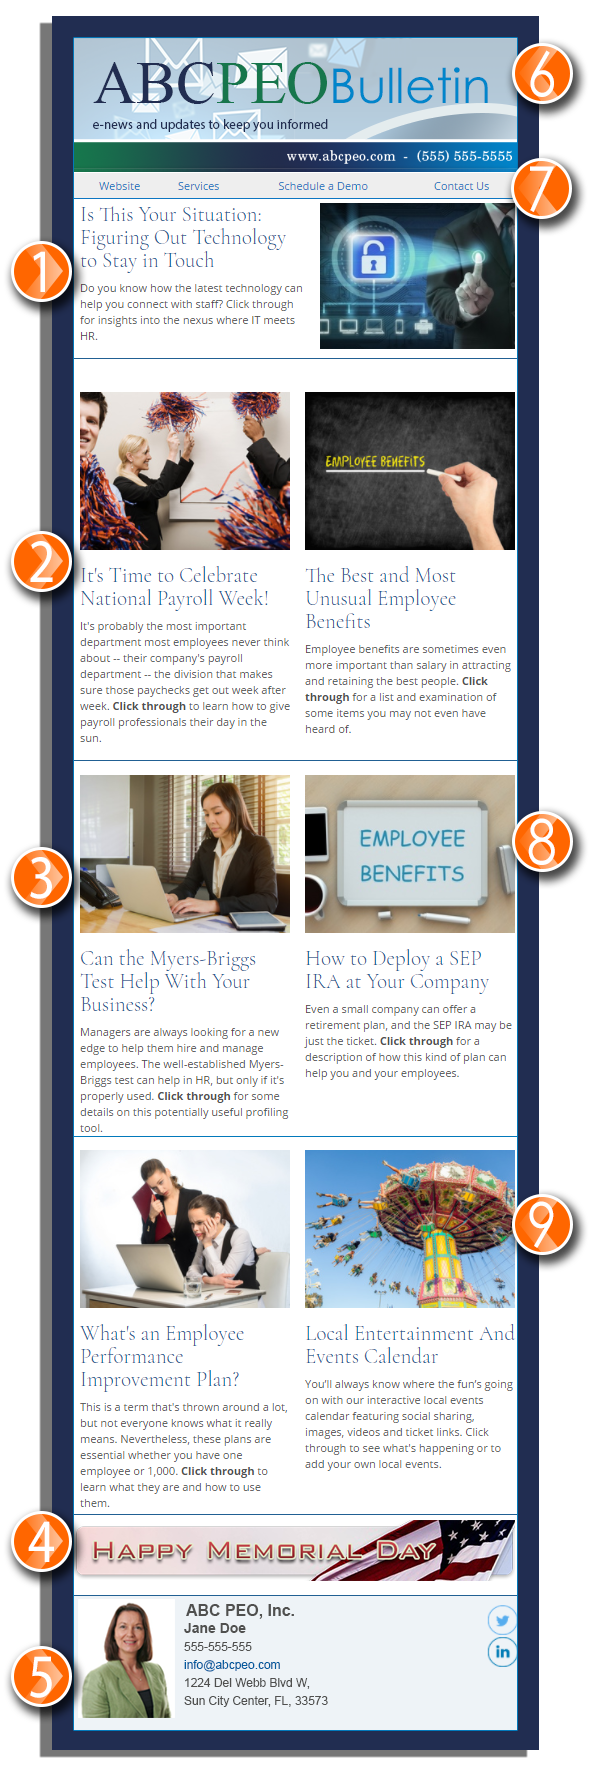 Tour An IndustryNewsletters PEO Email Marketing Newsletter Sample